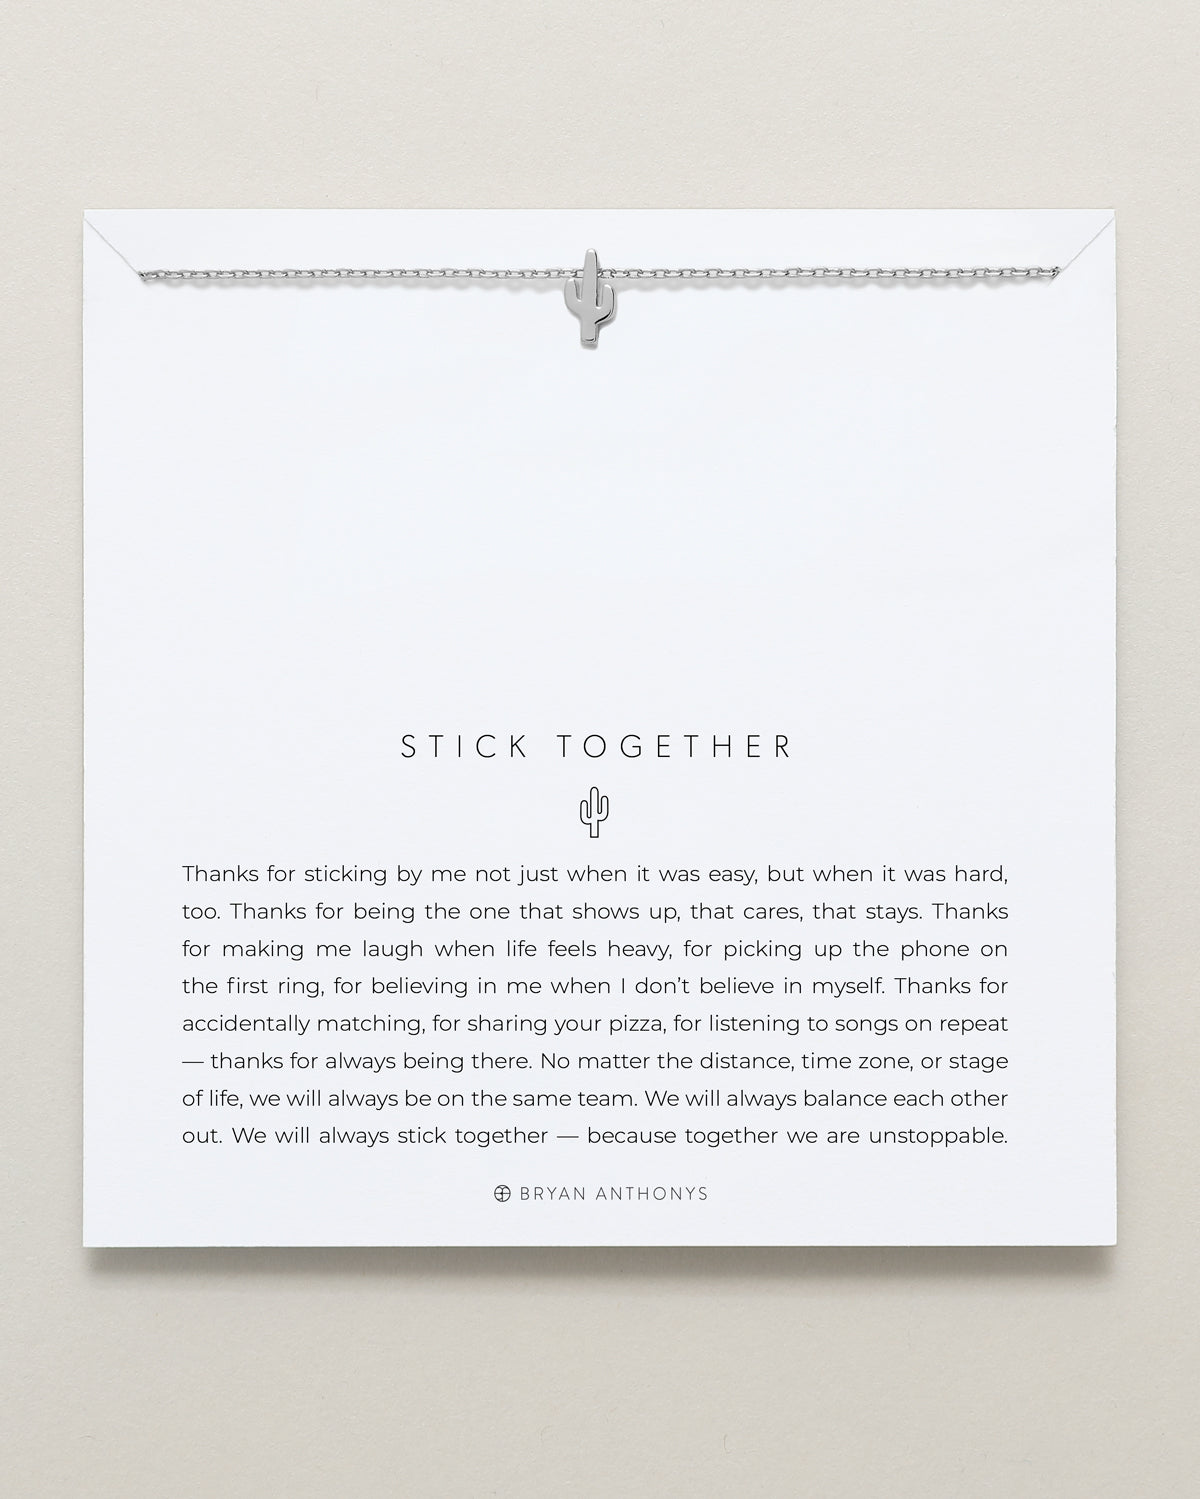 Bryan Anthonys Stick Together Silver Necklace On Card